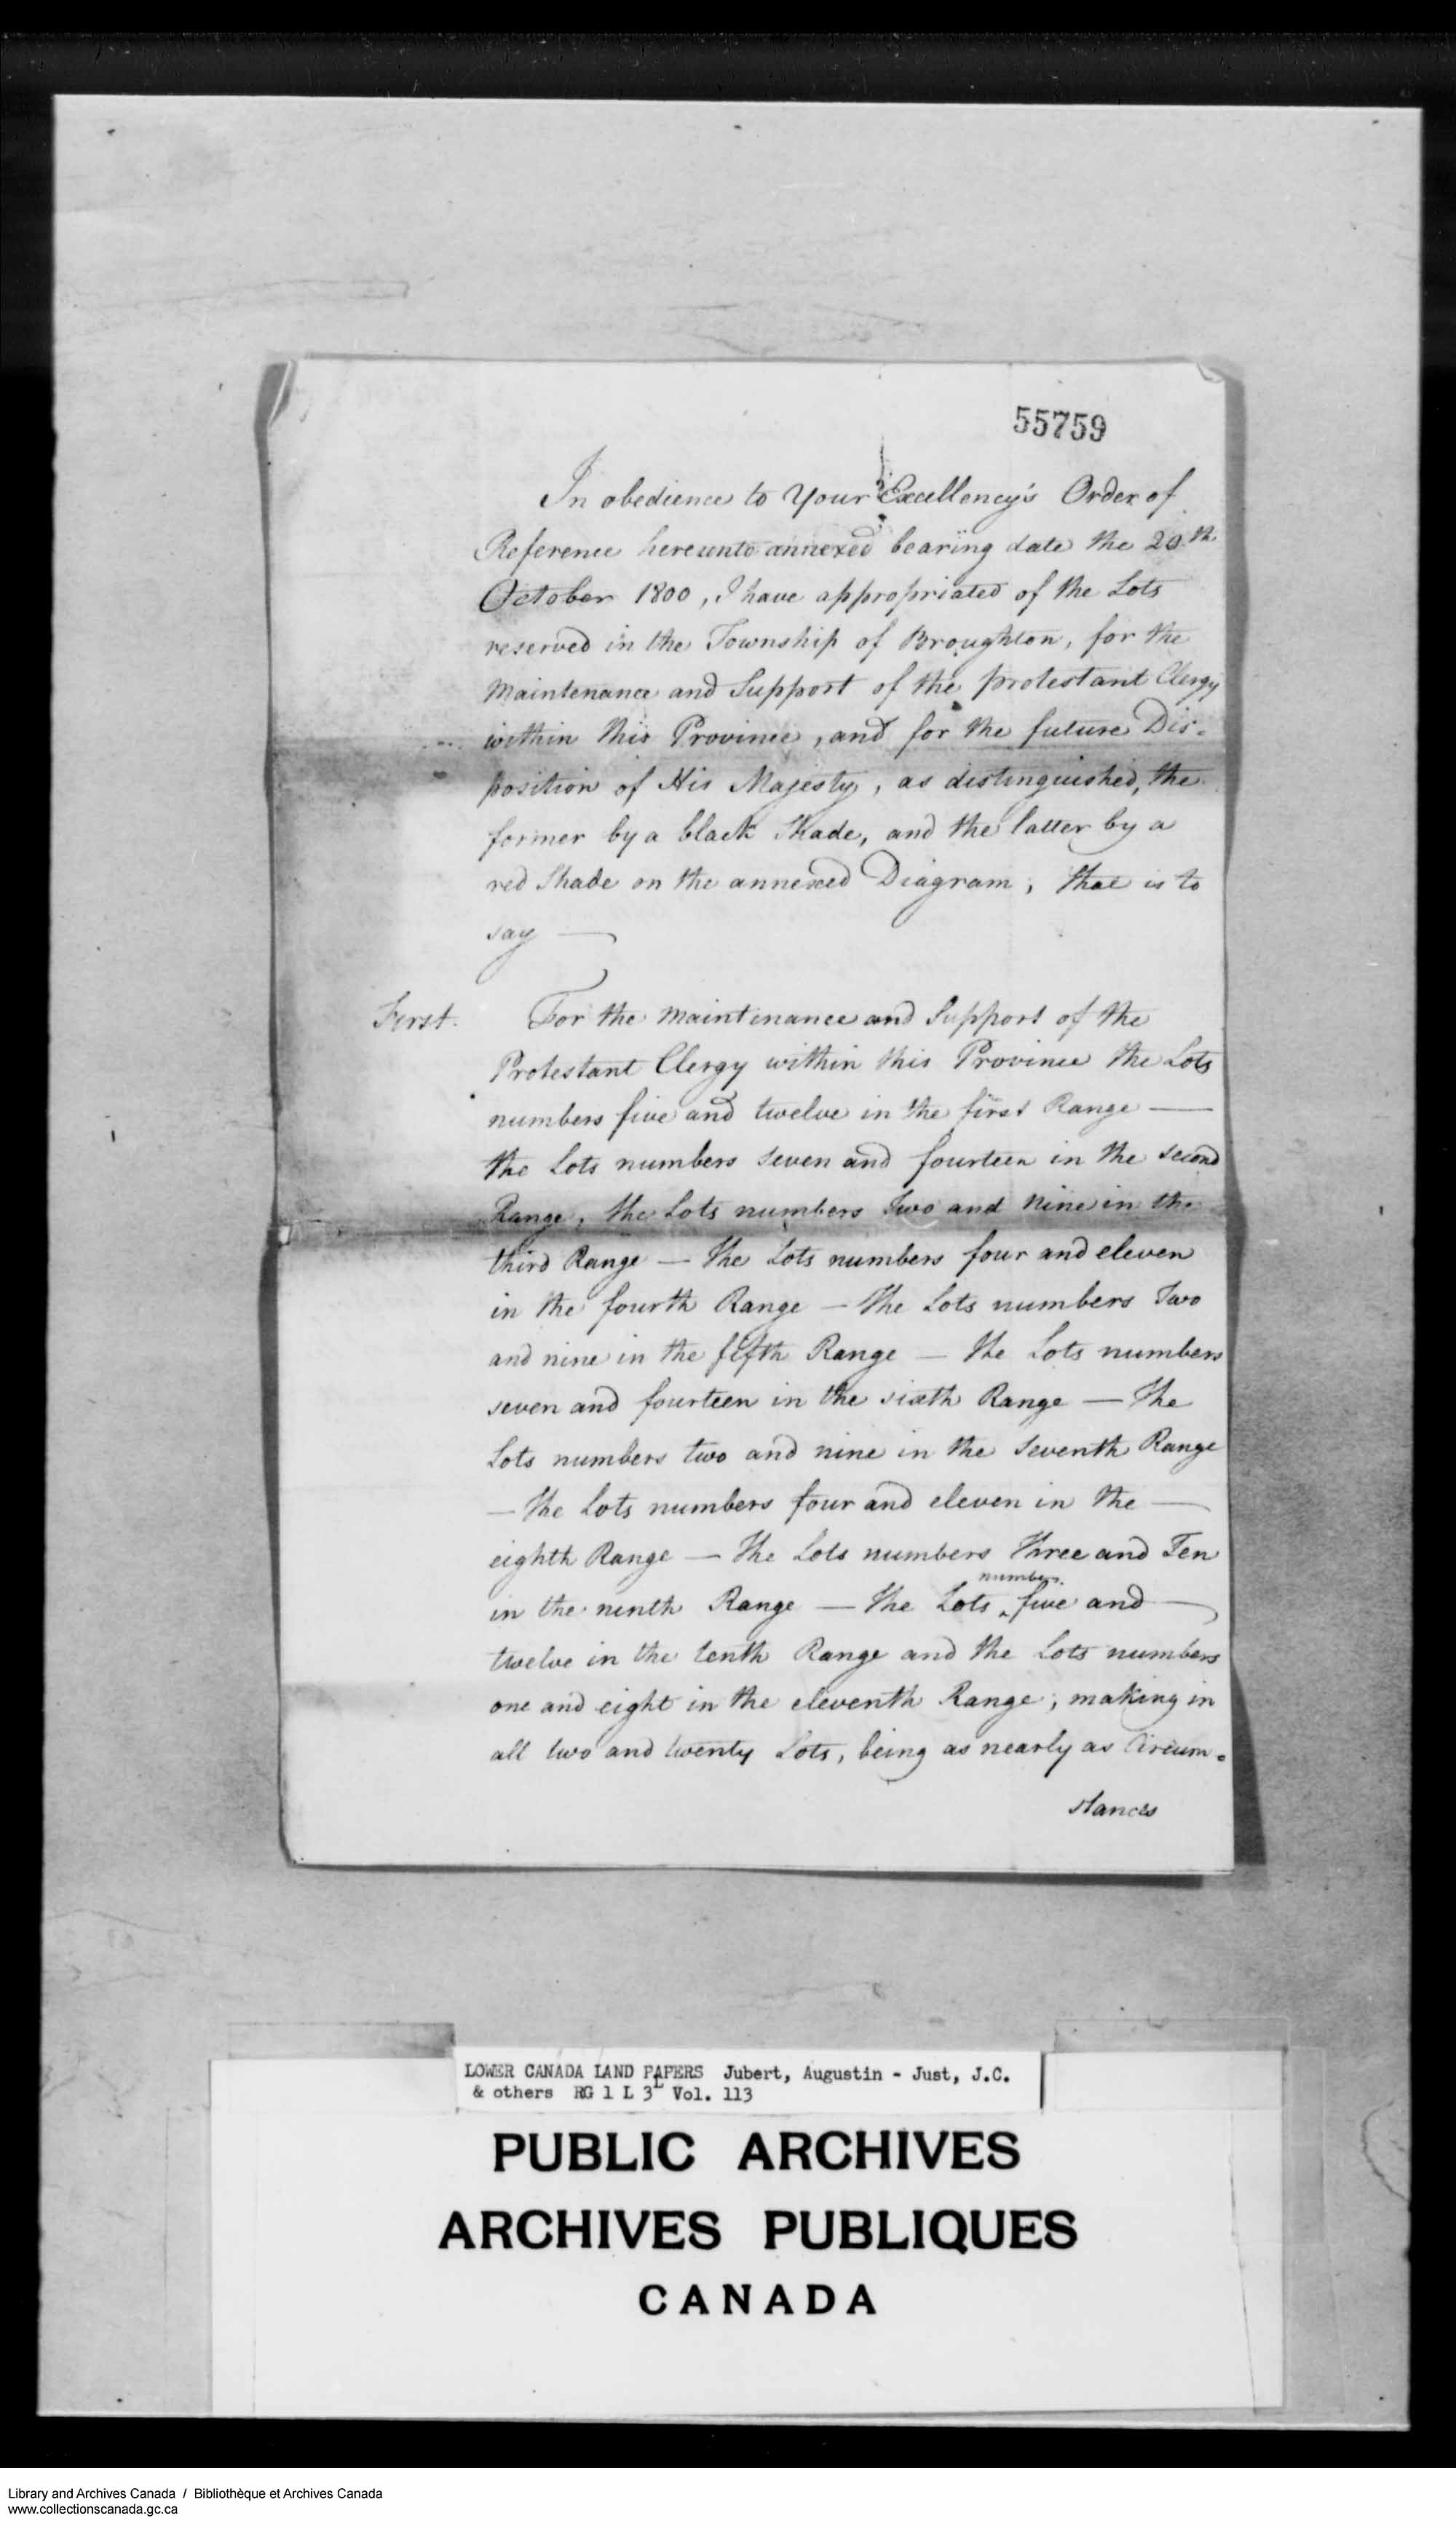 Digitized page of  for Image No.: e008700247